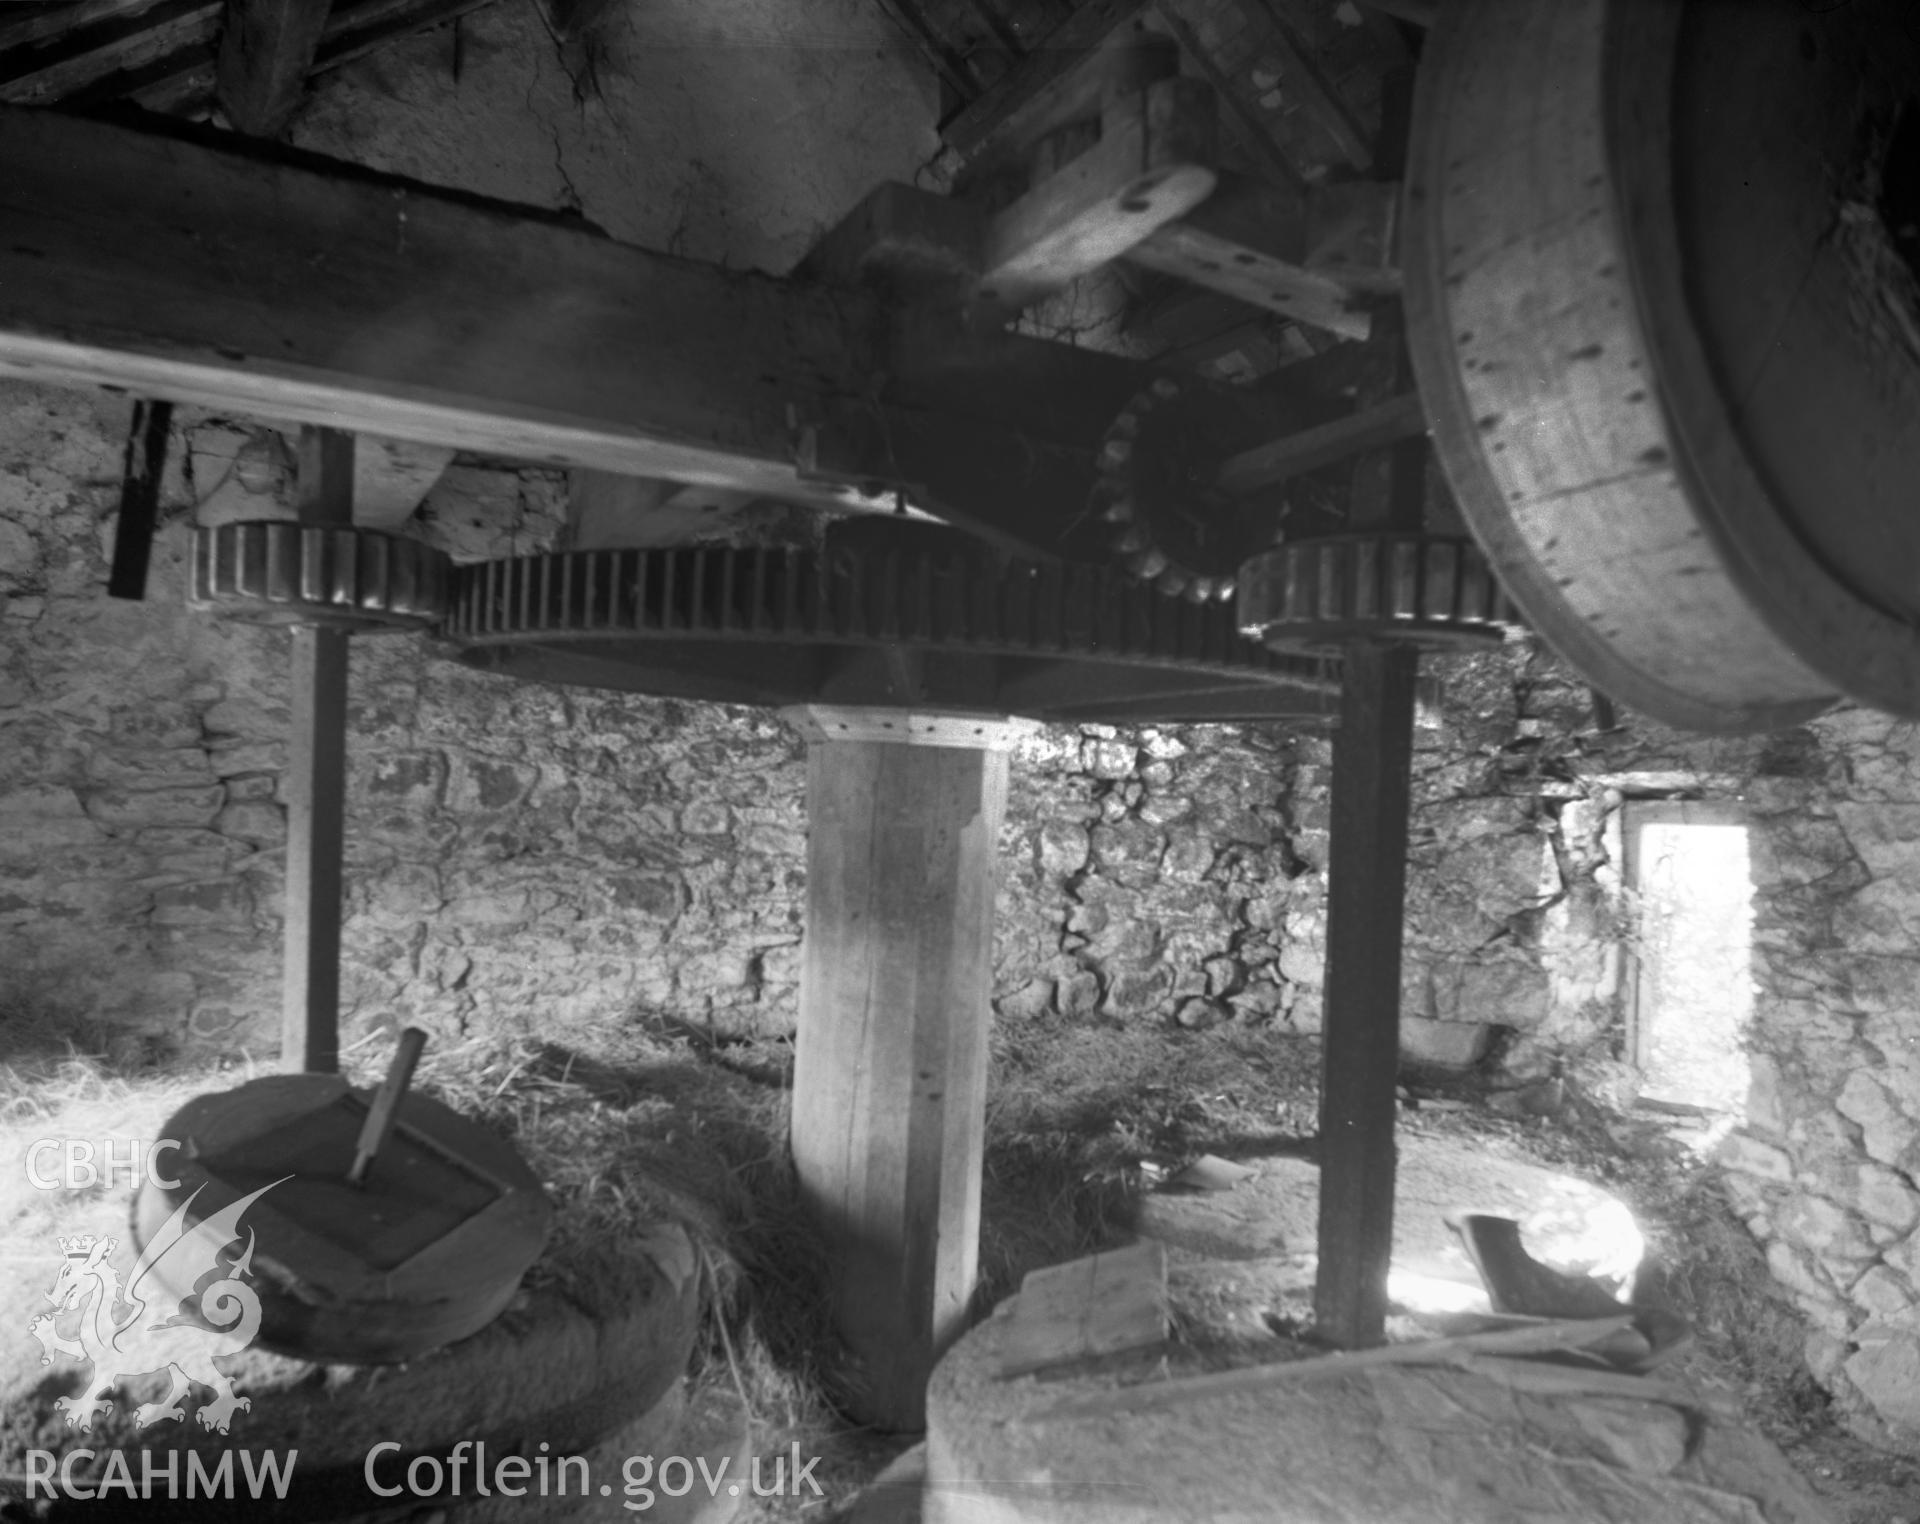 Digital copy of an acetate negative showing spur wheel, stone nuts and layshaft at Felin Dulas.